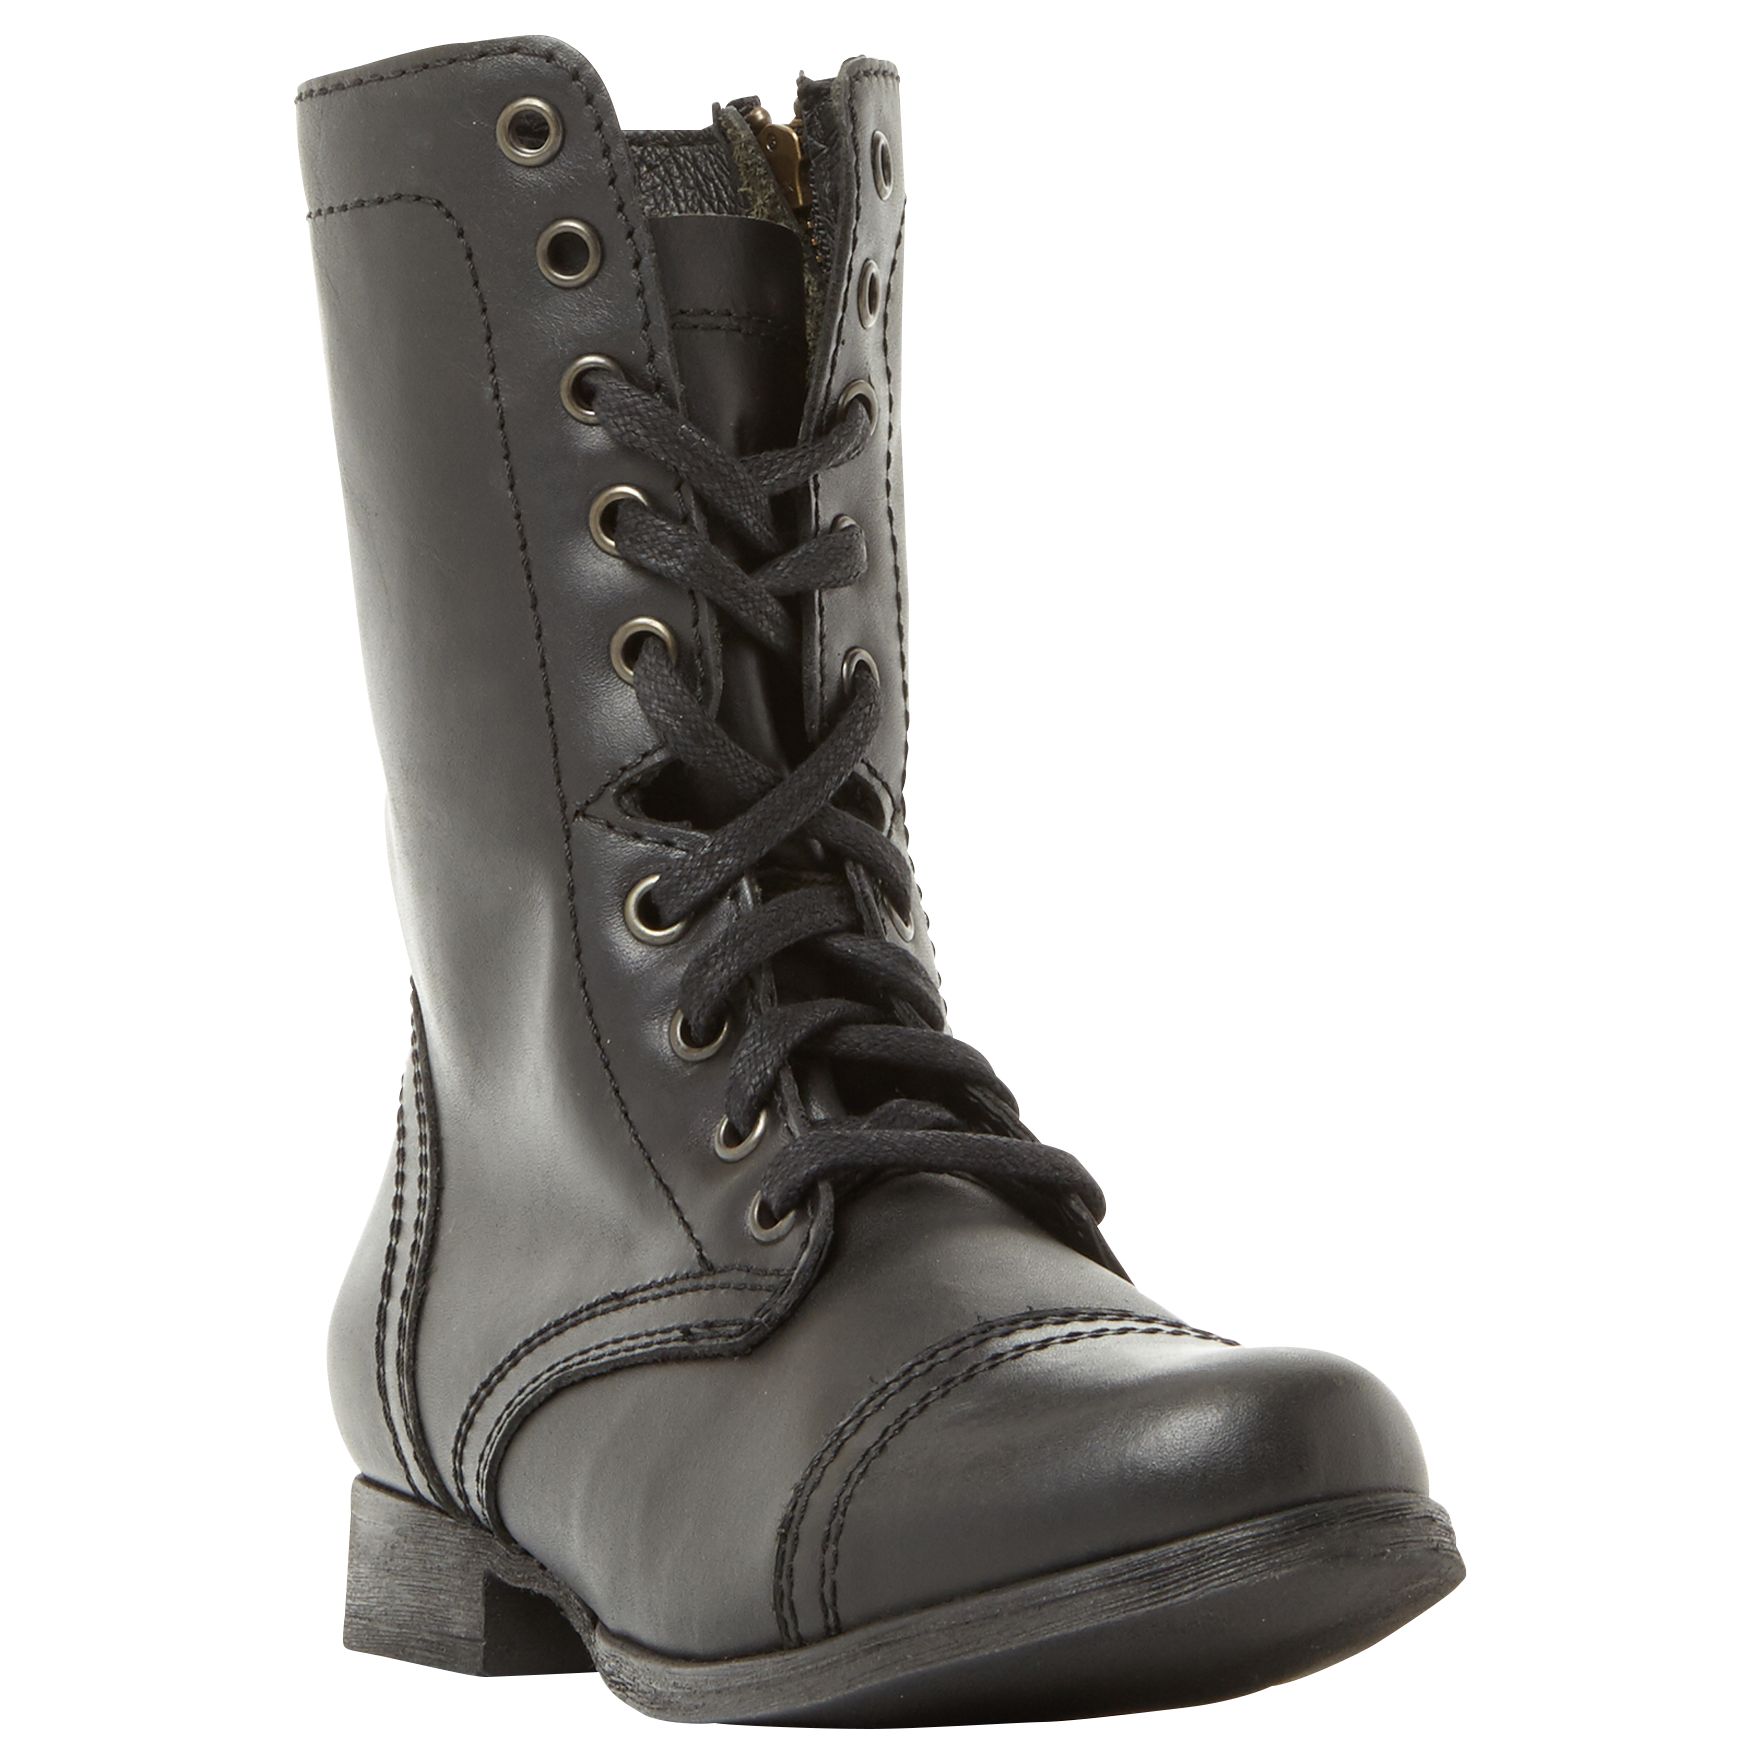 Steve Madden Troopa Lace Up Boots, Black, 7